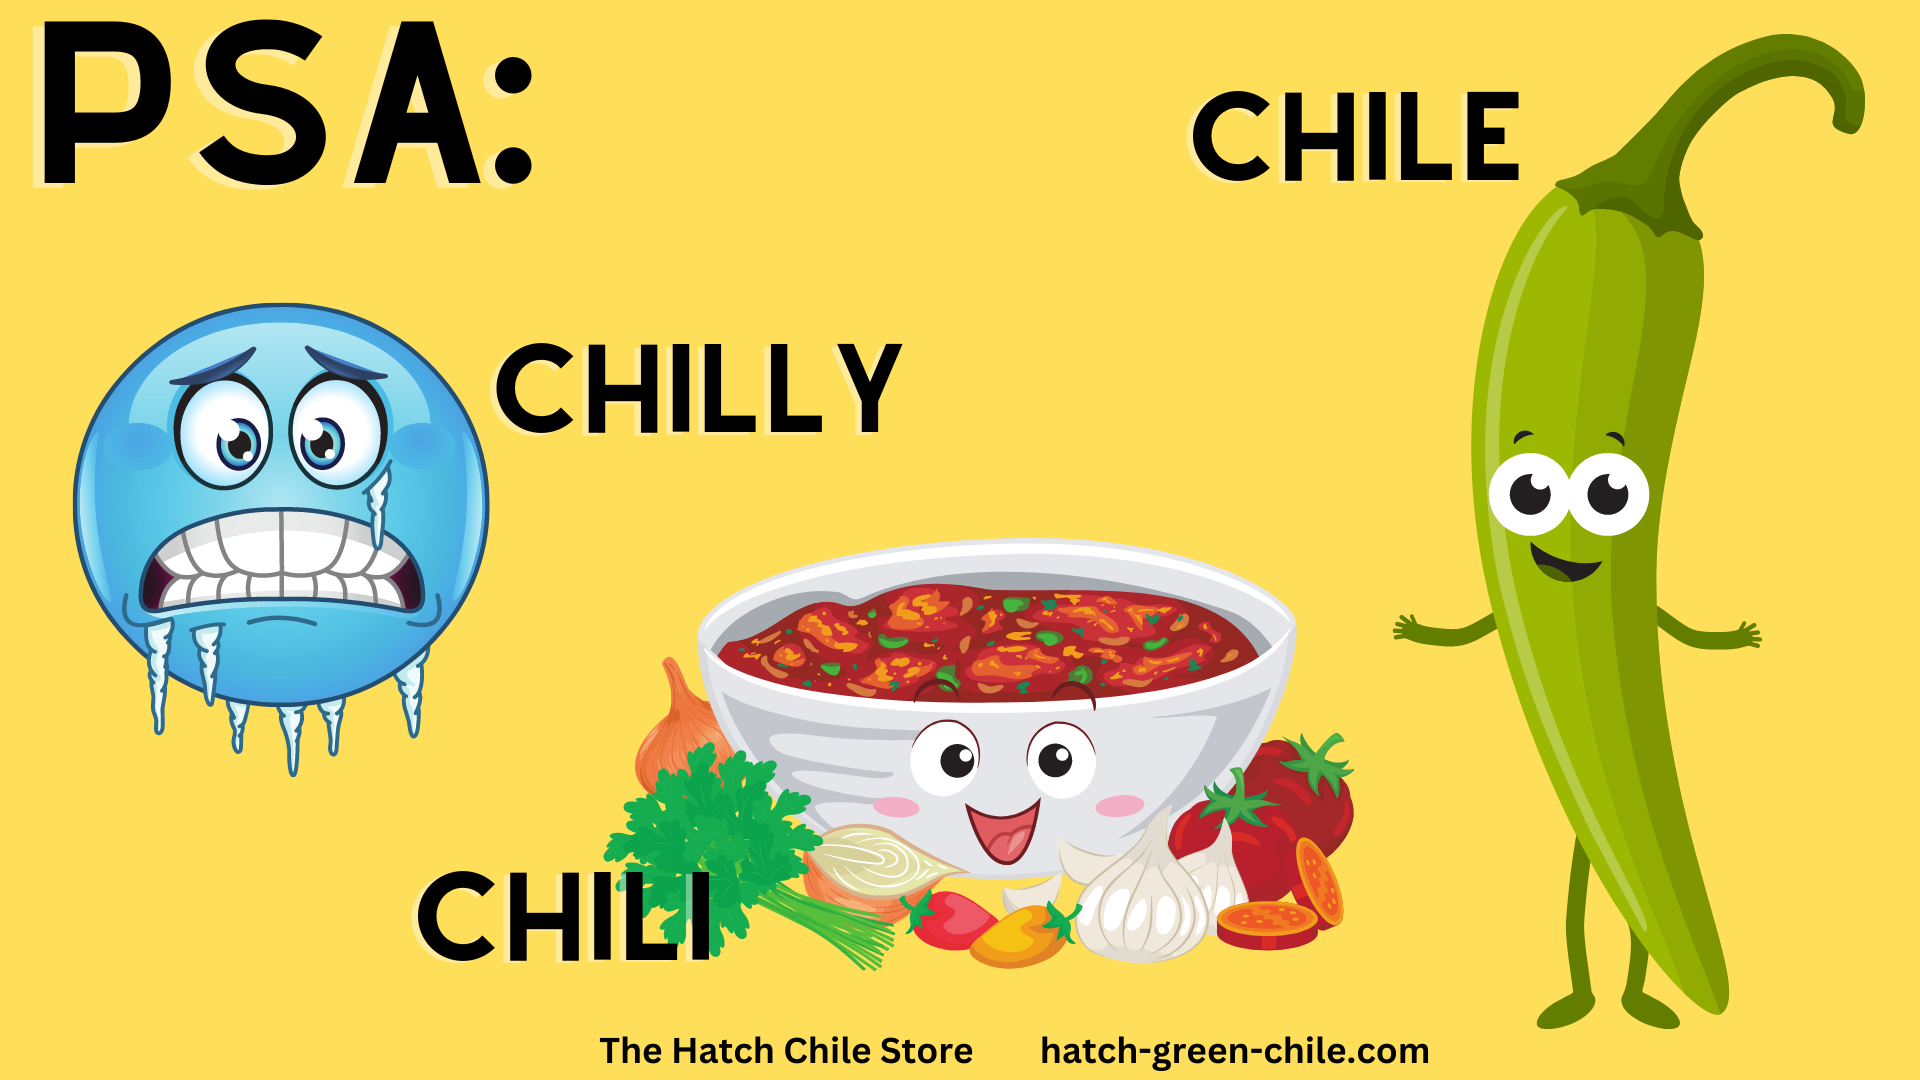 Chile, Chili or Chilly?